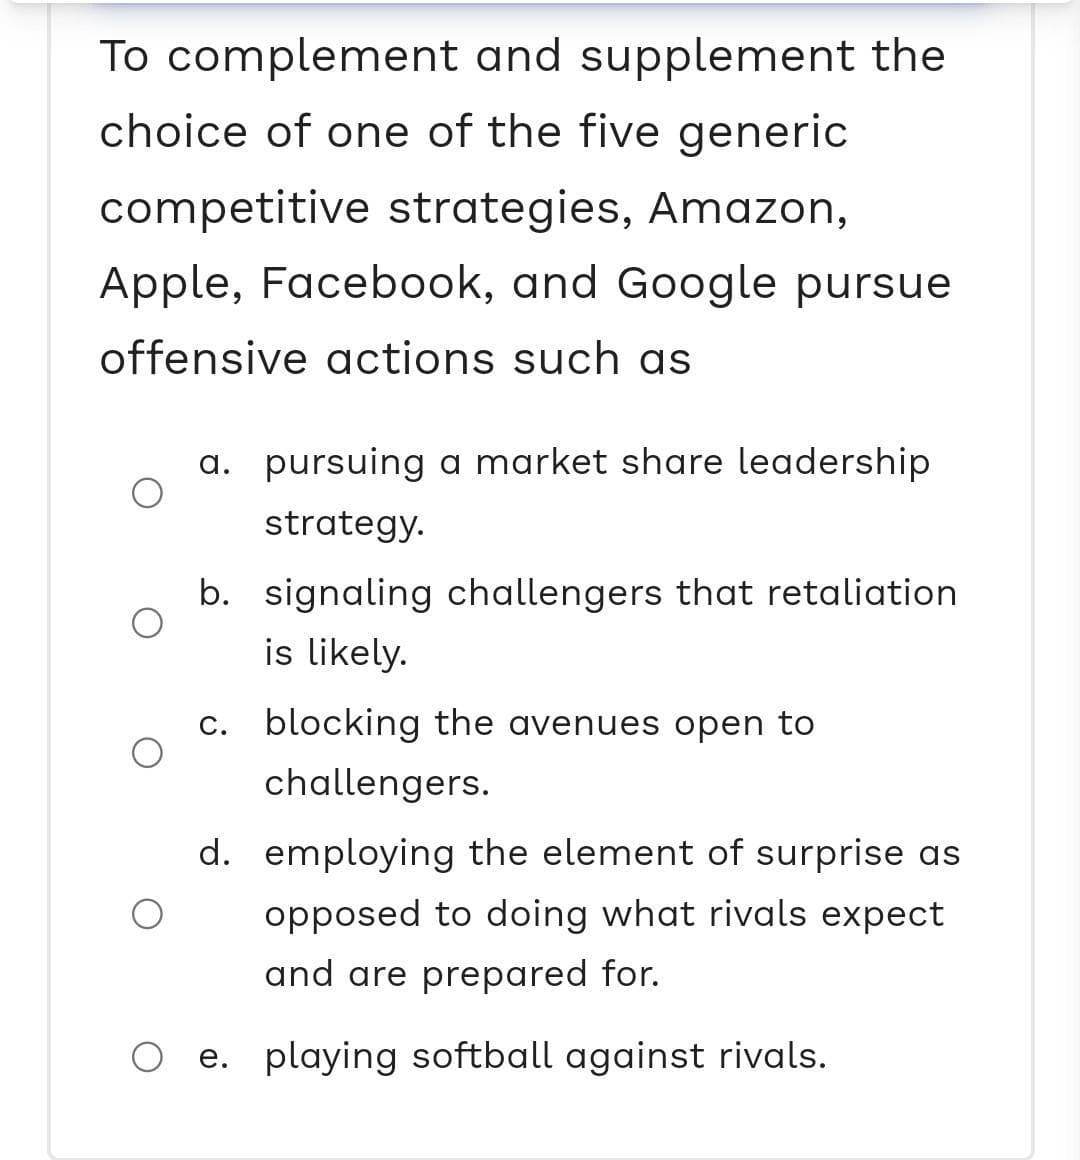 To complement and supplement the
choice of one of the five generic
competitive strategies, Amazon,
Apple, Facebook, and Google pursue
offensive actions such as
a. pursuing a market share leadership
strategy.
b. signaling challengers that retaliation
is likely.
c. blocking the avenues open to
challengers.
d. employing the element of surprise as
opposed to doing what rivals expect
and are prepared for.
e. playing softball against rivals.